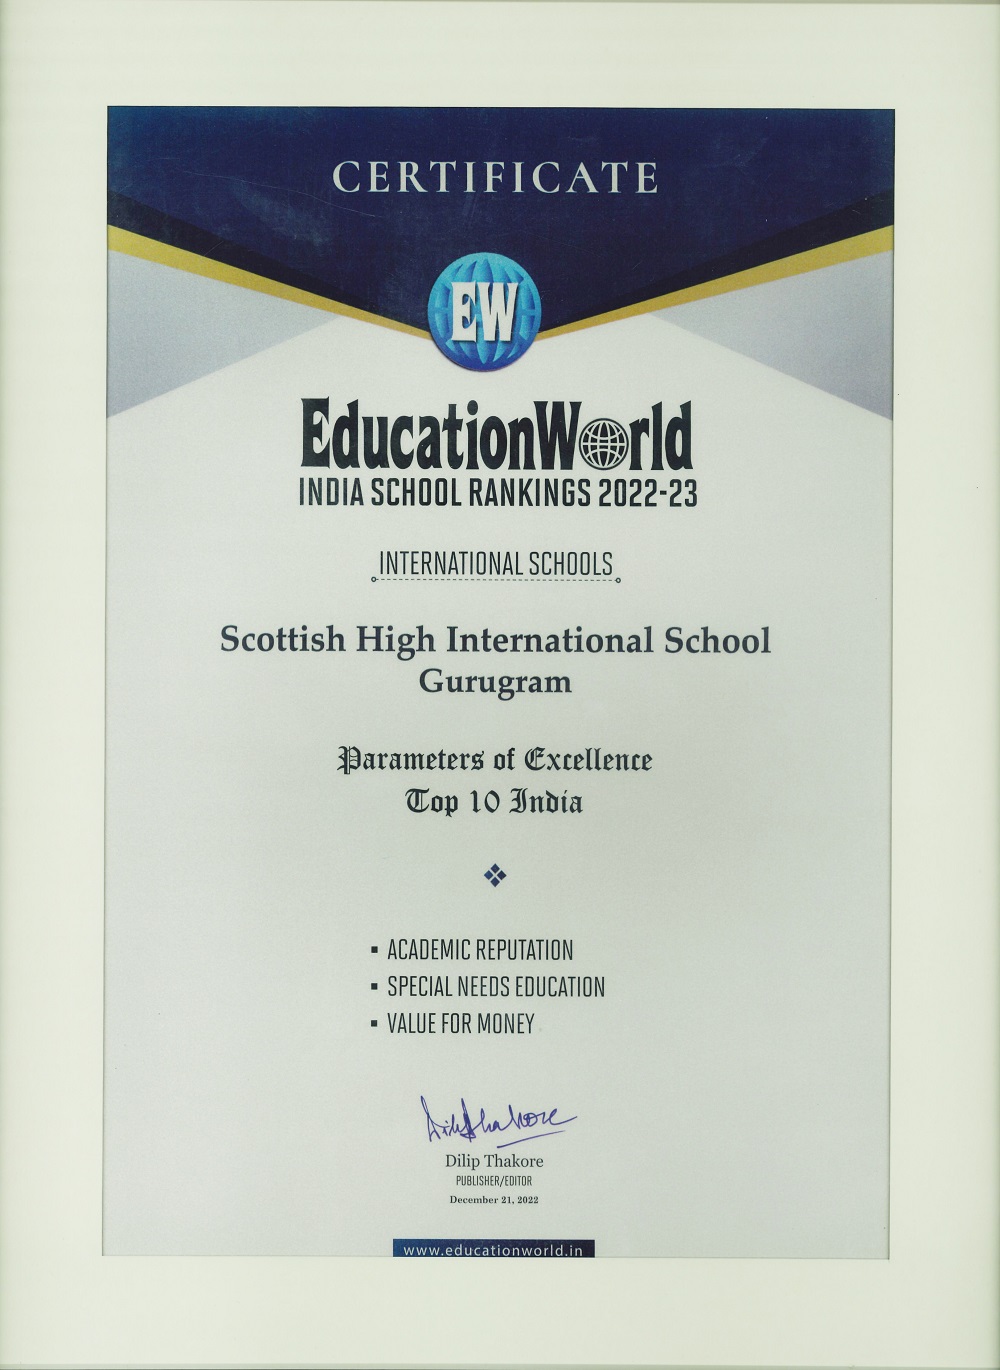 Scottish high has been awarded and ranked 1 - Education World India School Rankings 2022-23